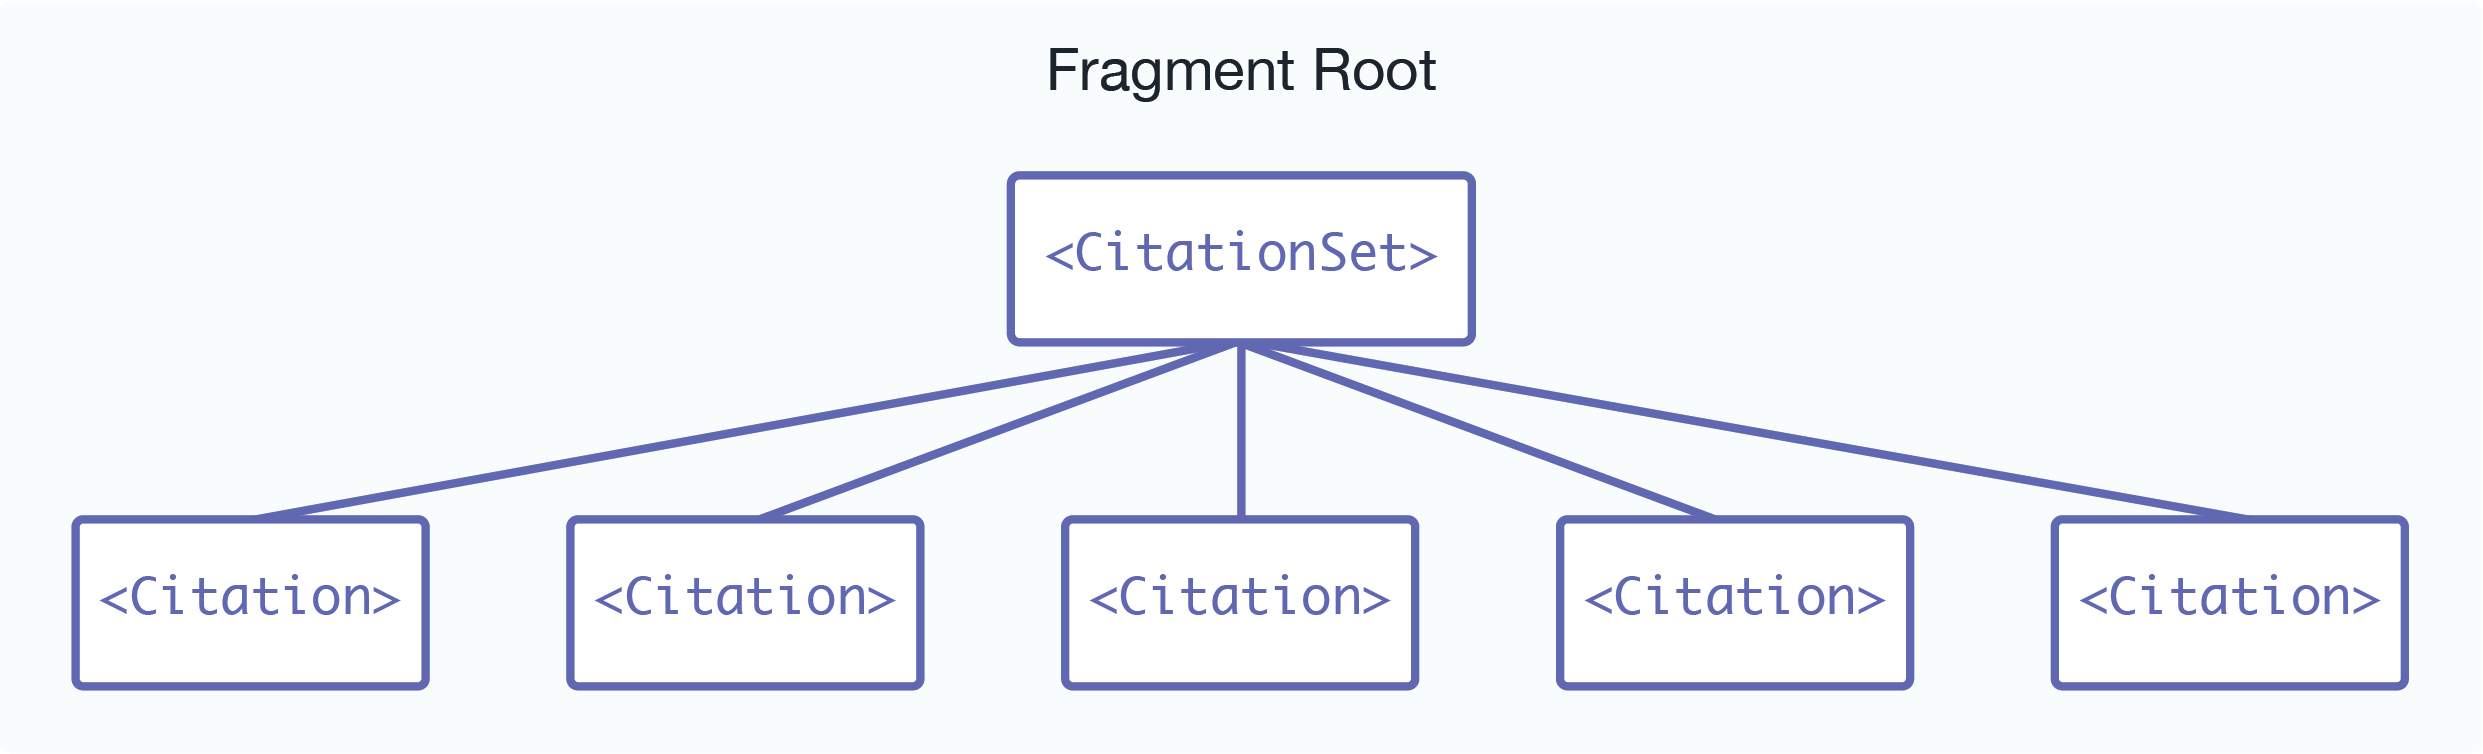 Diagram showing an XML document rooted at <CitationSet> that contains many instances of a <Citation> node.